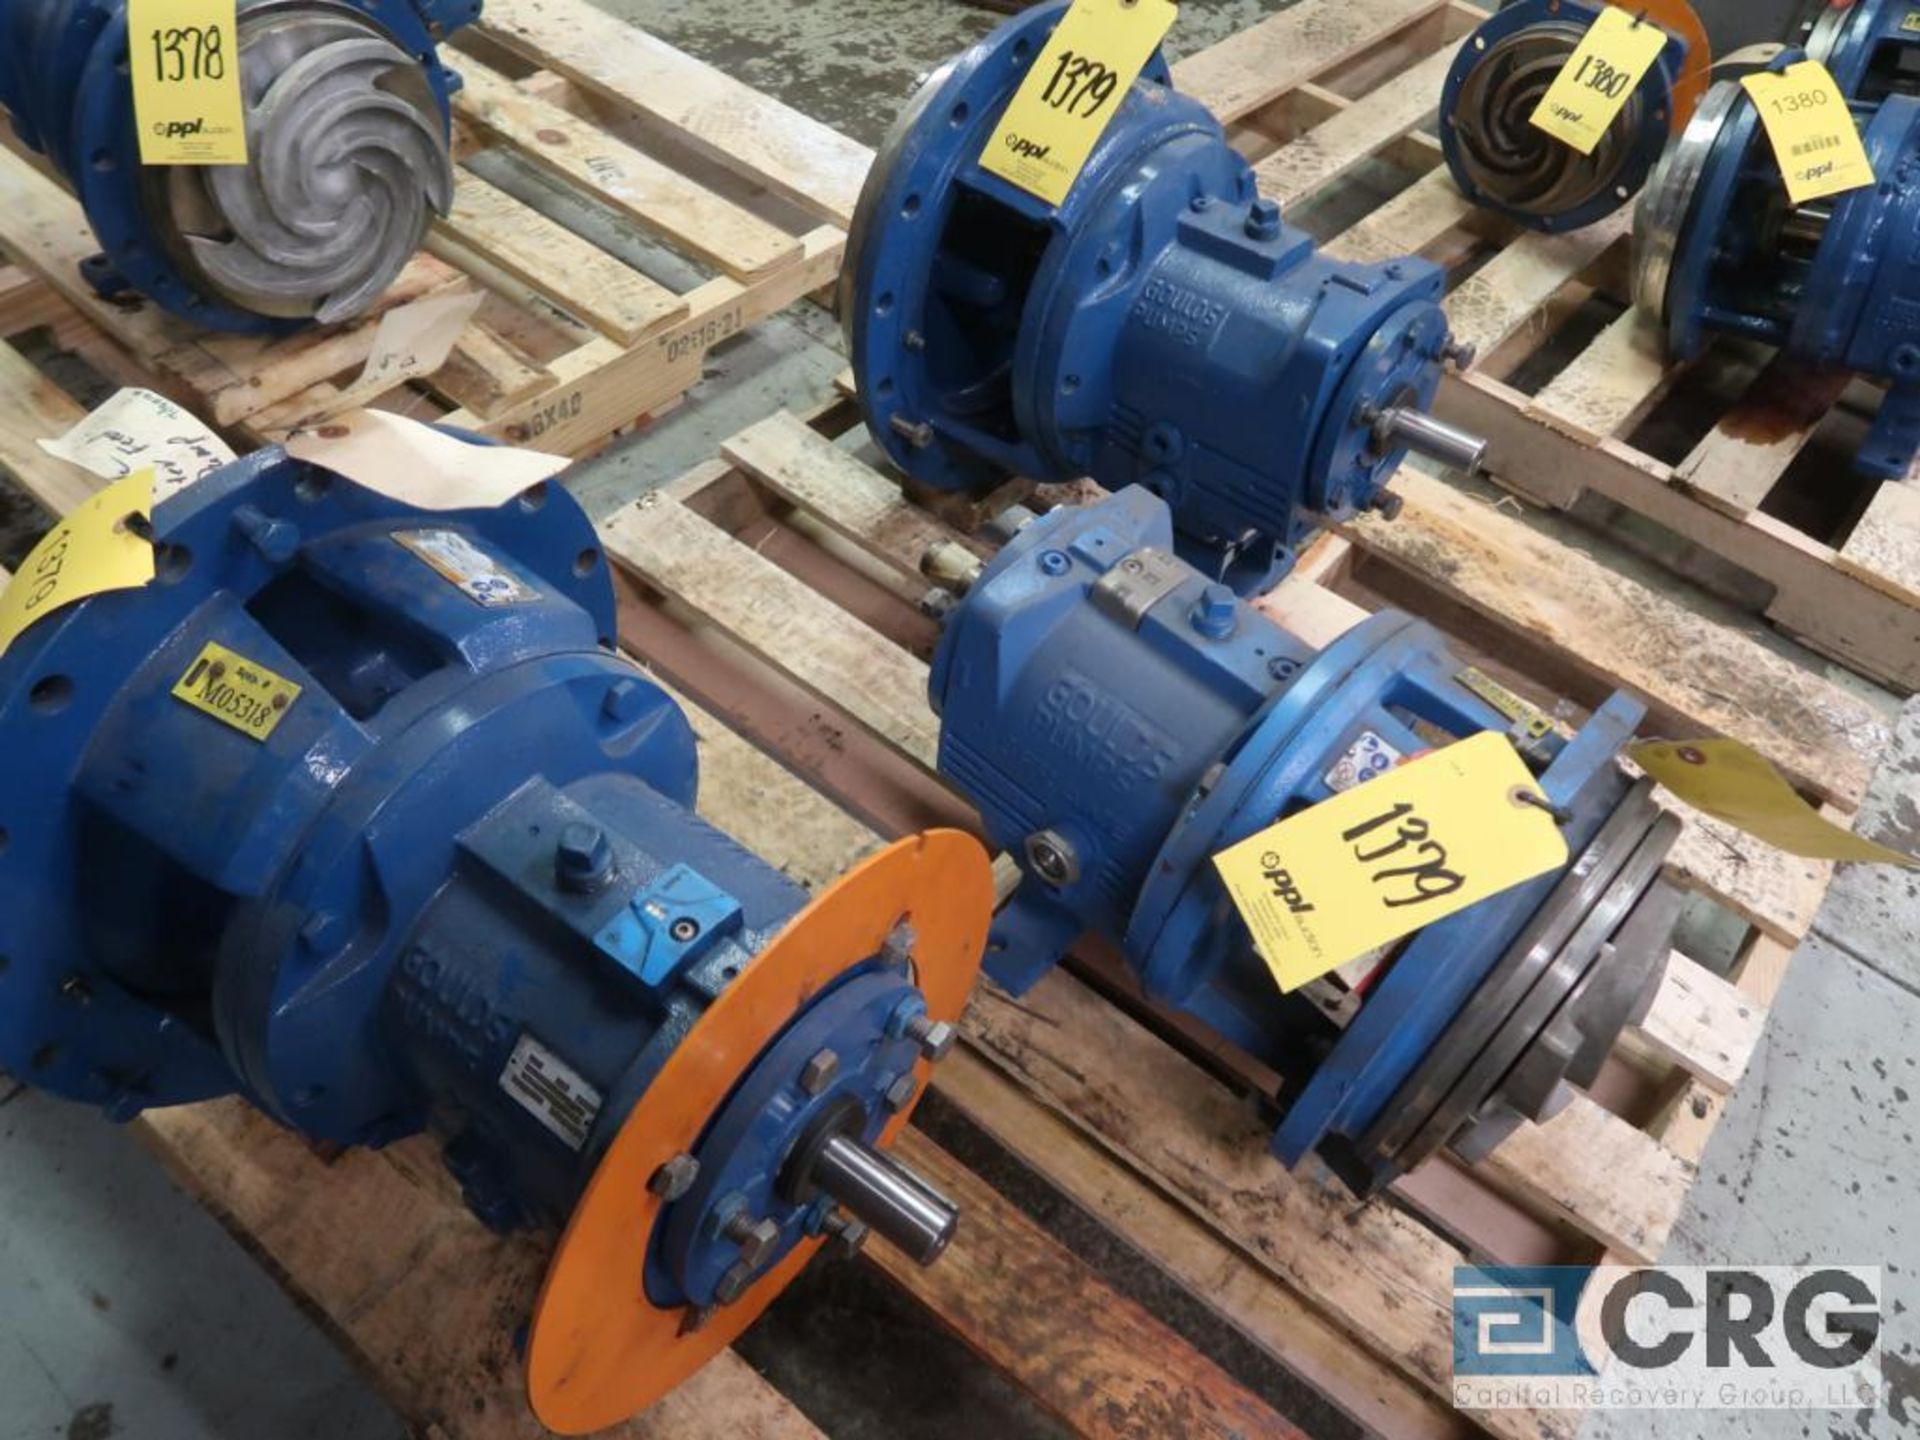 Lot of (3) Goulds 3196 MTI pumps, (2) 13 in., and (1) 10 in. (Basement Stores)